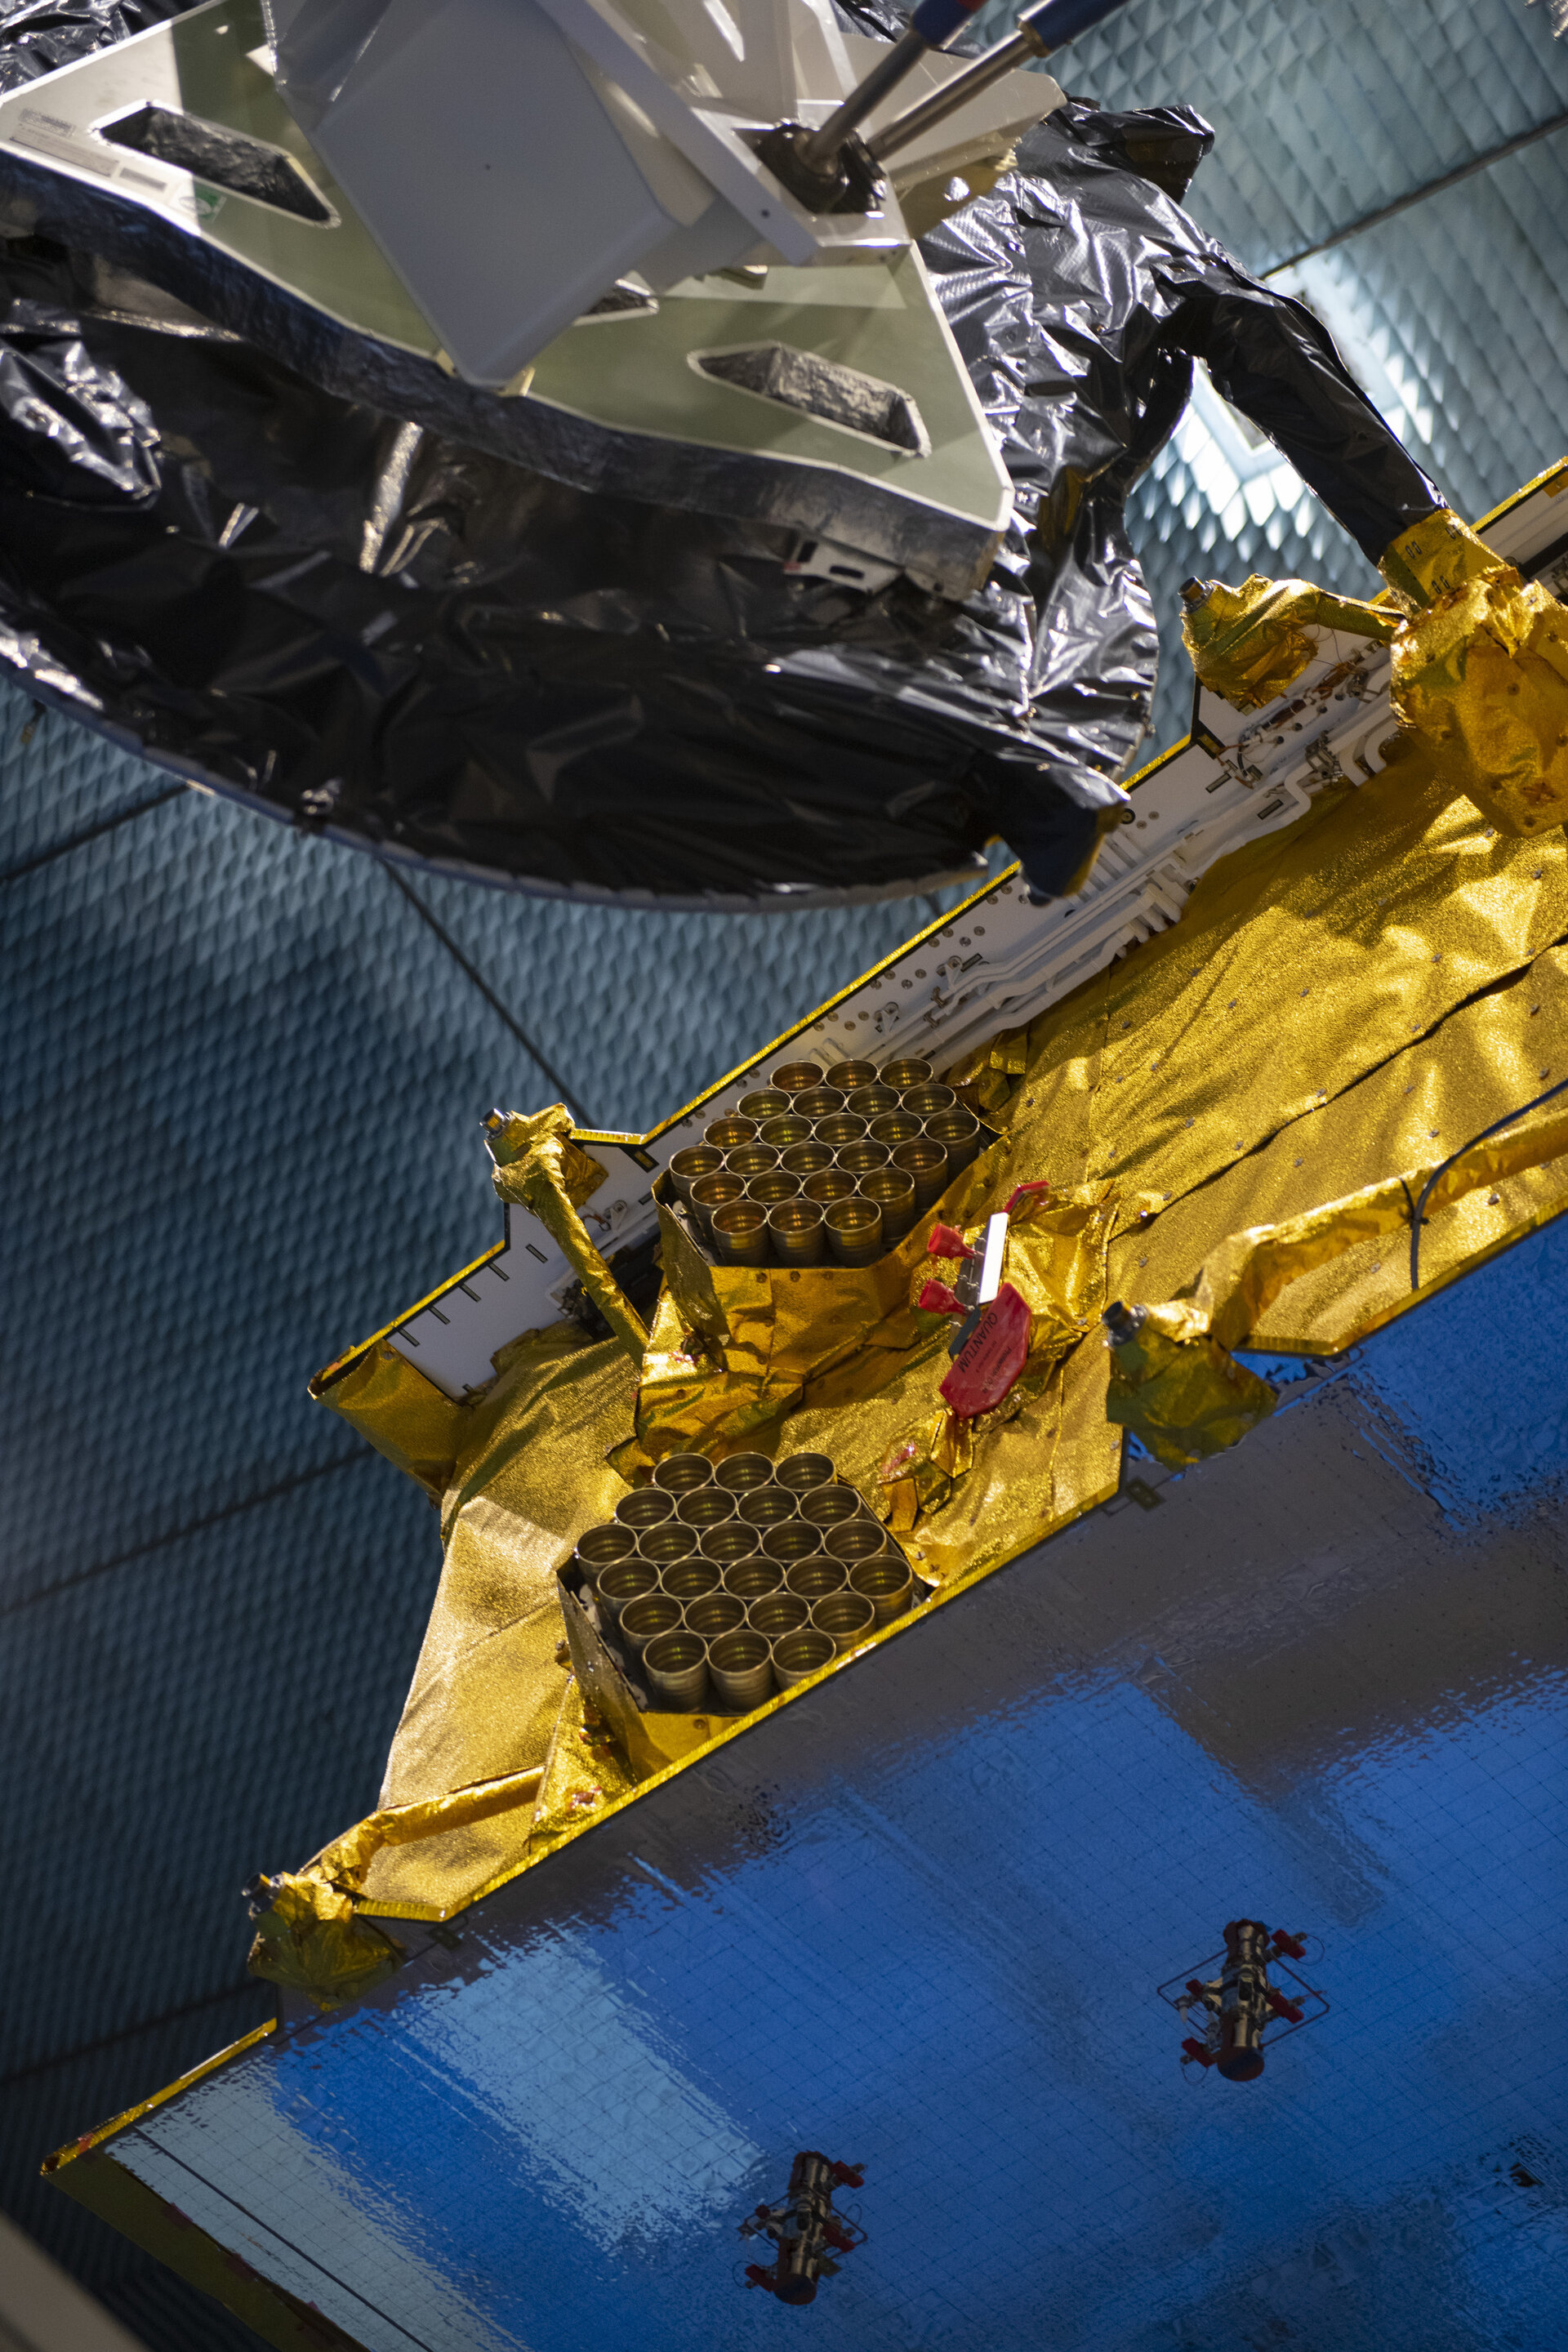 Detail of the Eutelsat Quantum satellite in a radio-frequency test chamber